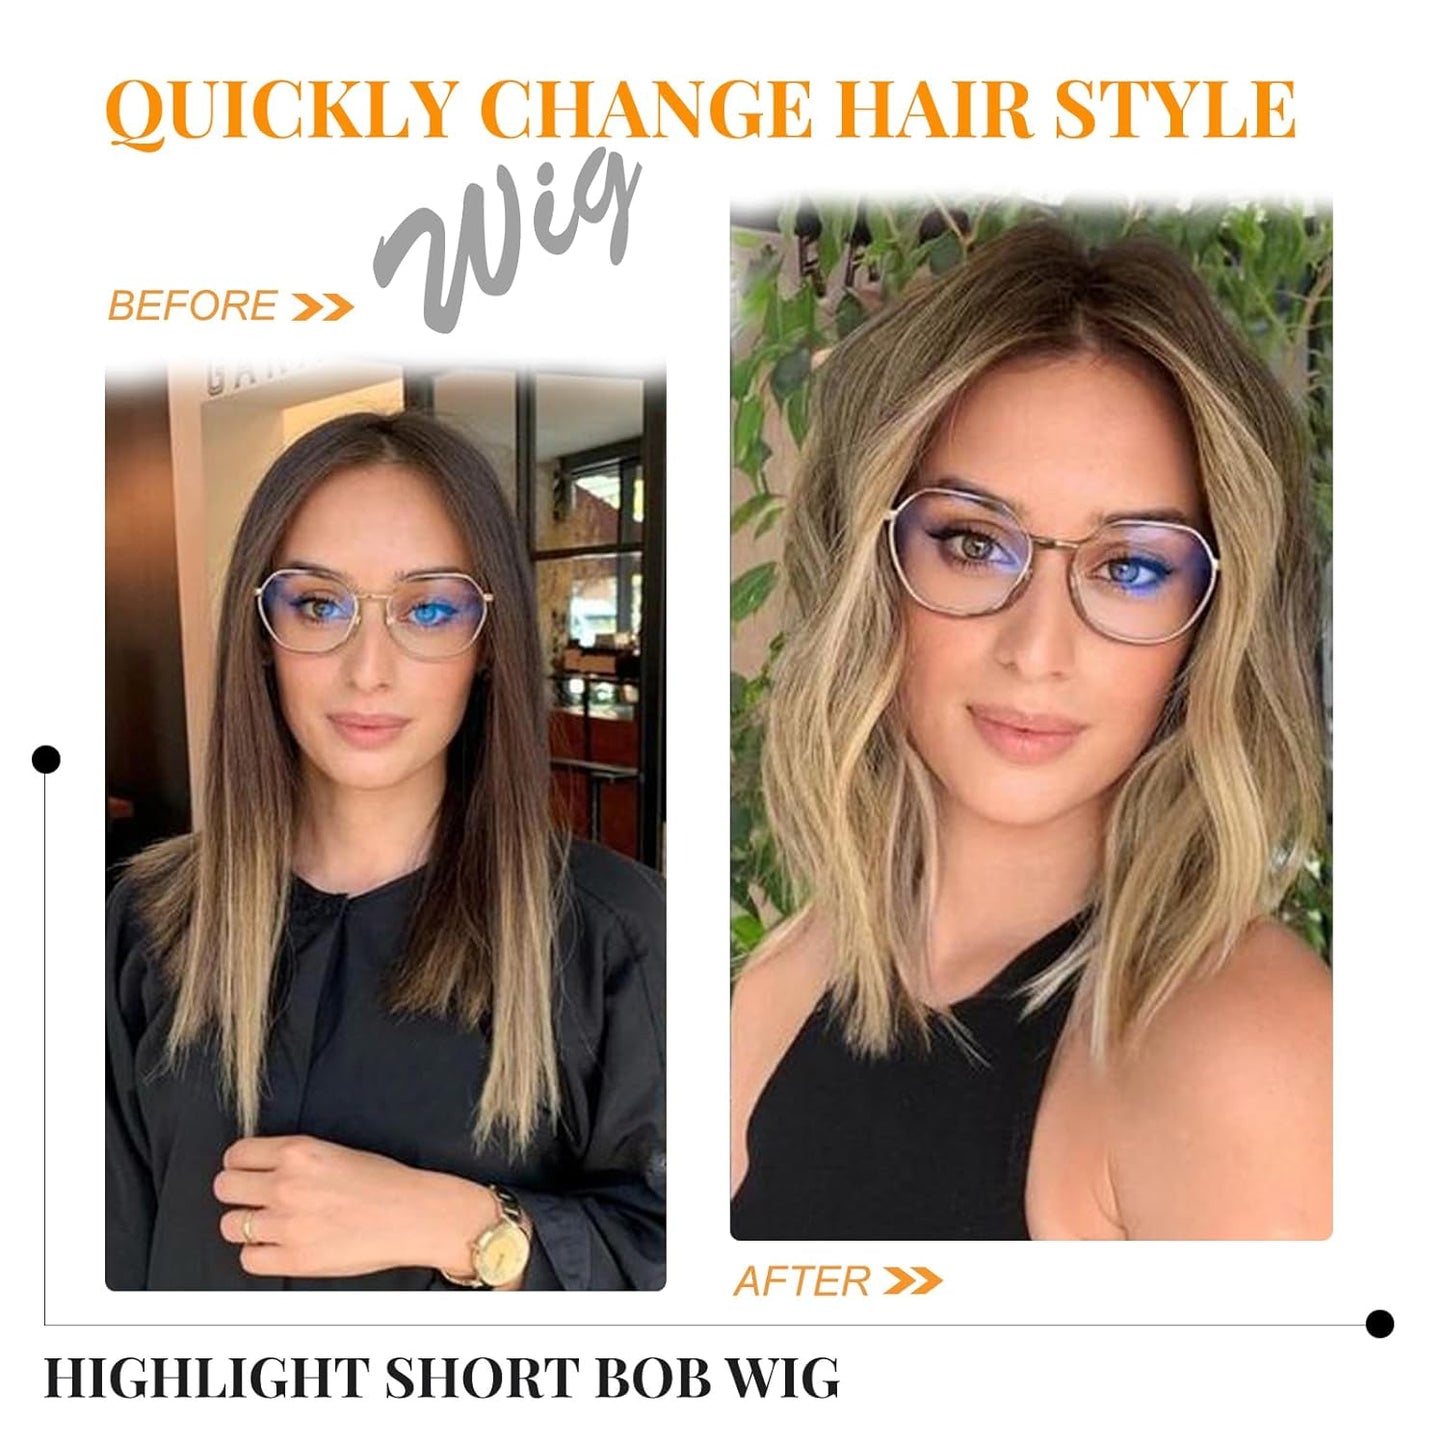 Radiant Transformation: Brown to Blonde Highlight Short Chin-Length Bob Wig - Straight Human Hair for White Women's Women with Alopecia, Cancer Chemo, and Hair Loss! Hair Alternative &amp; Hair Replacement